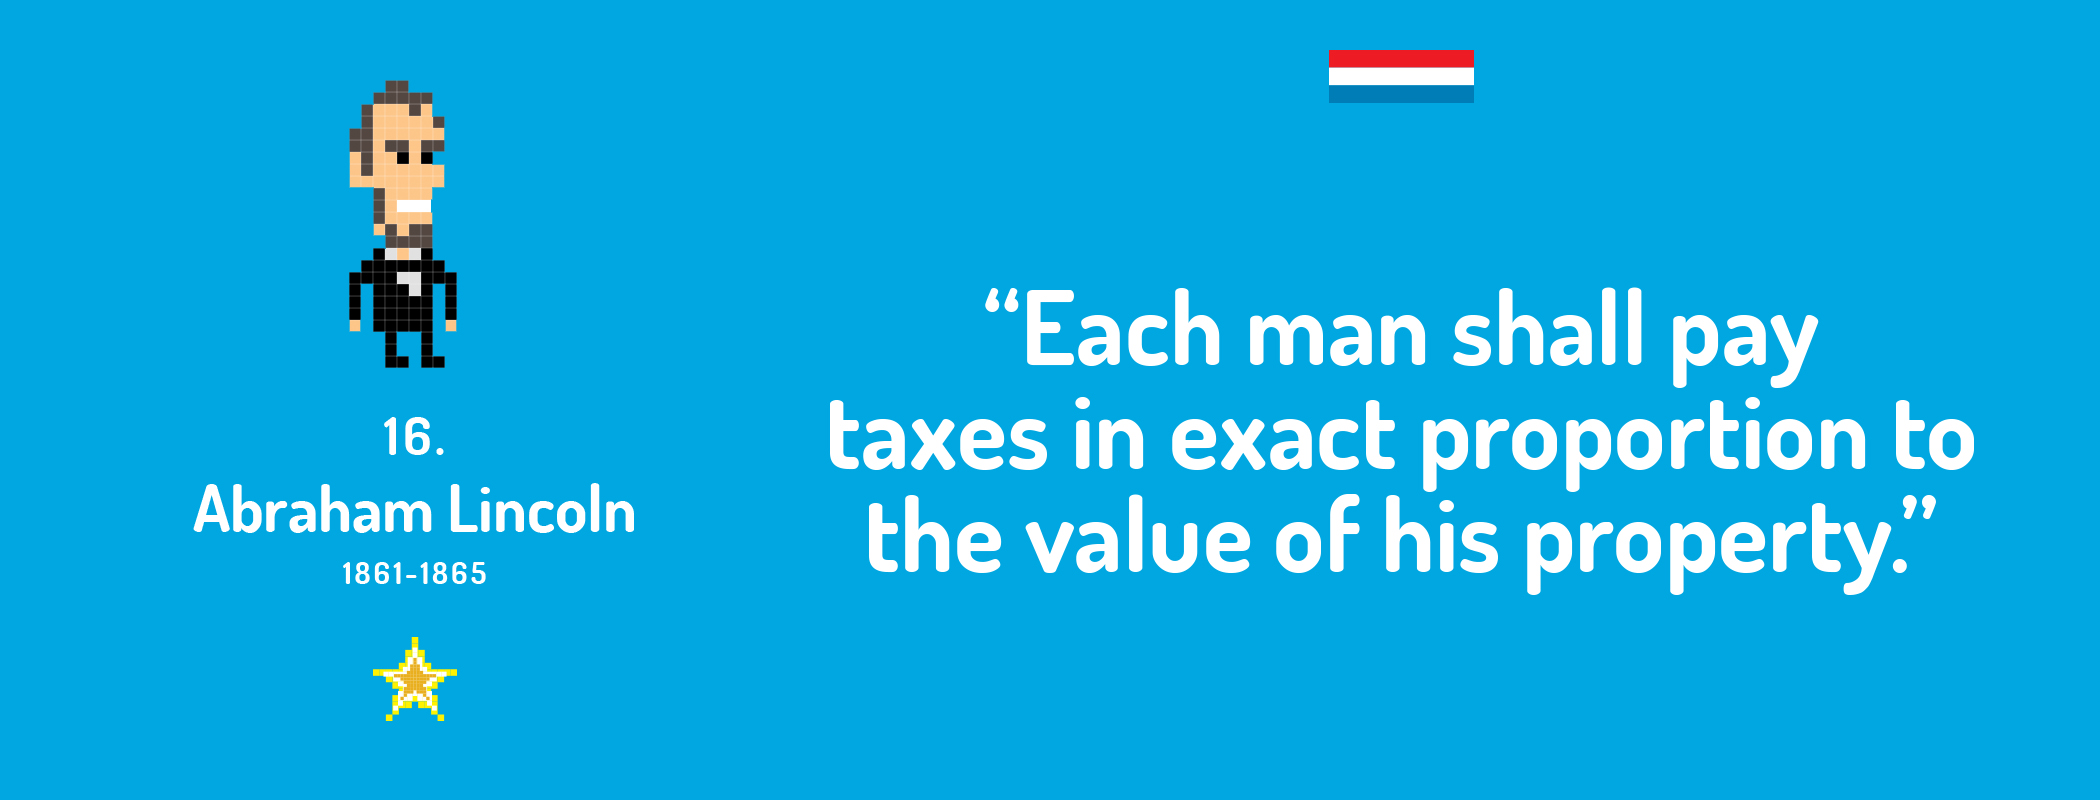 Each man shall pay taxes in exact proportion to the value of his property.